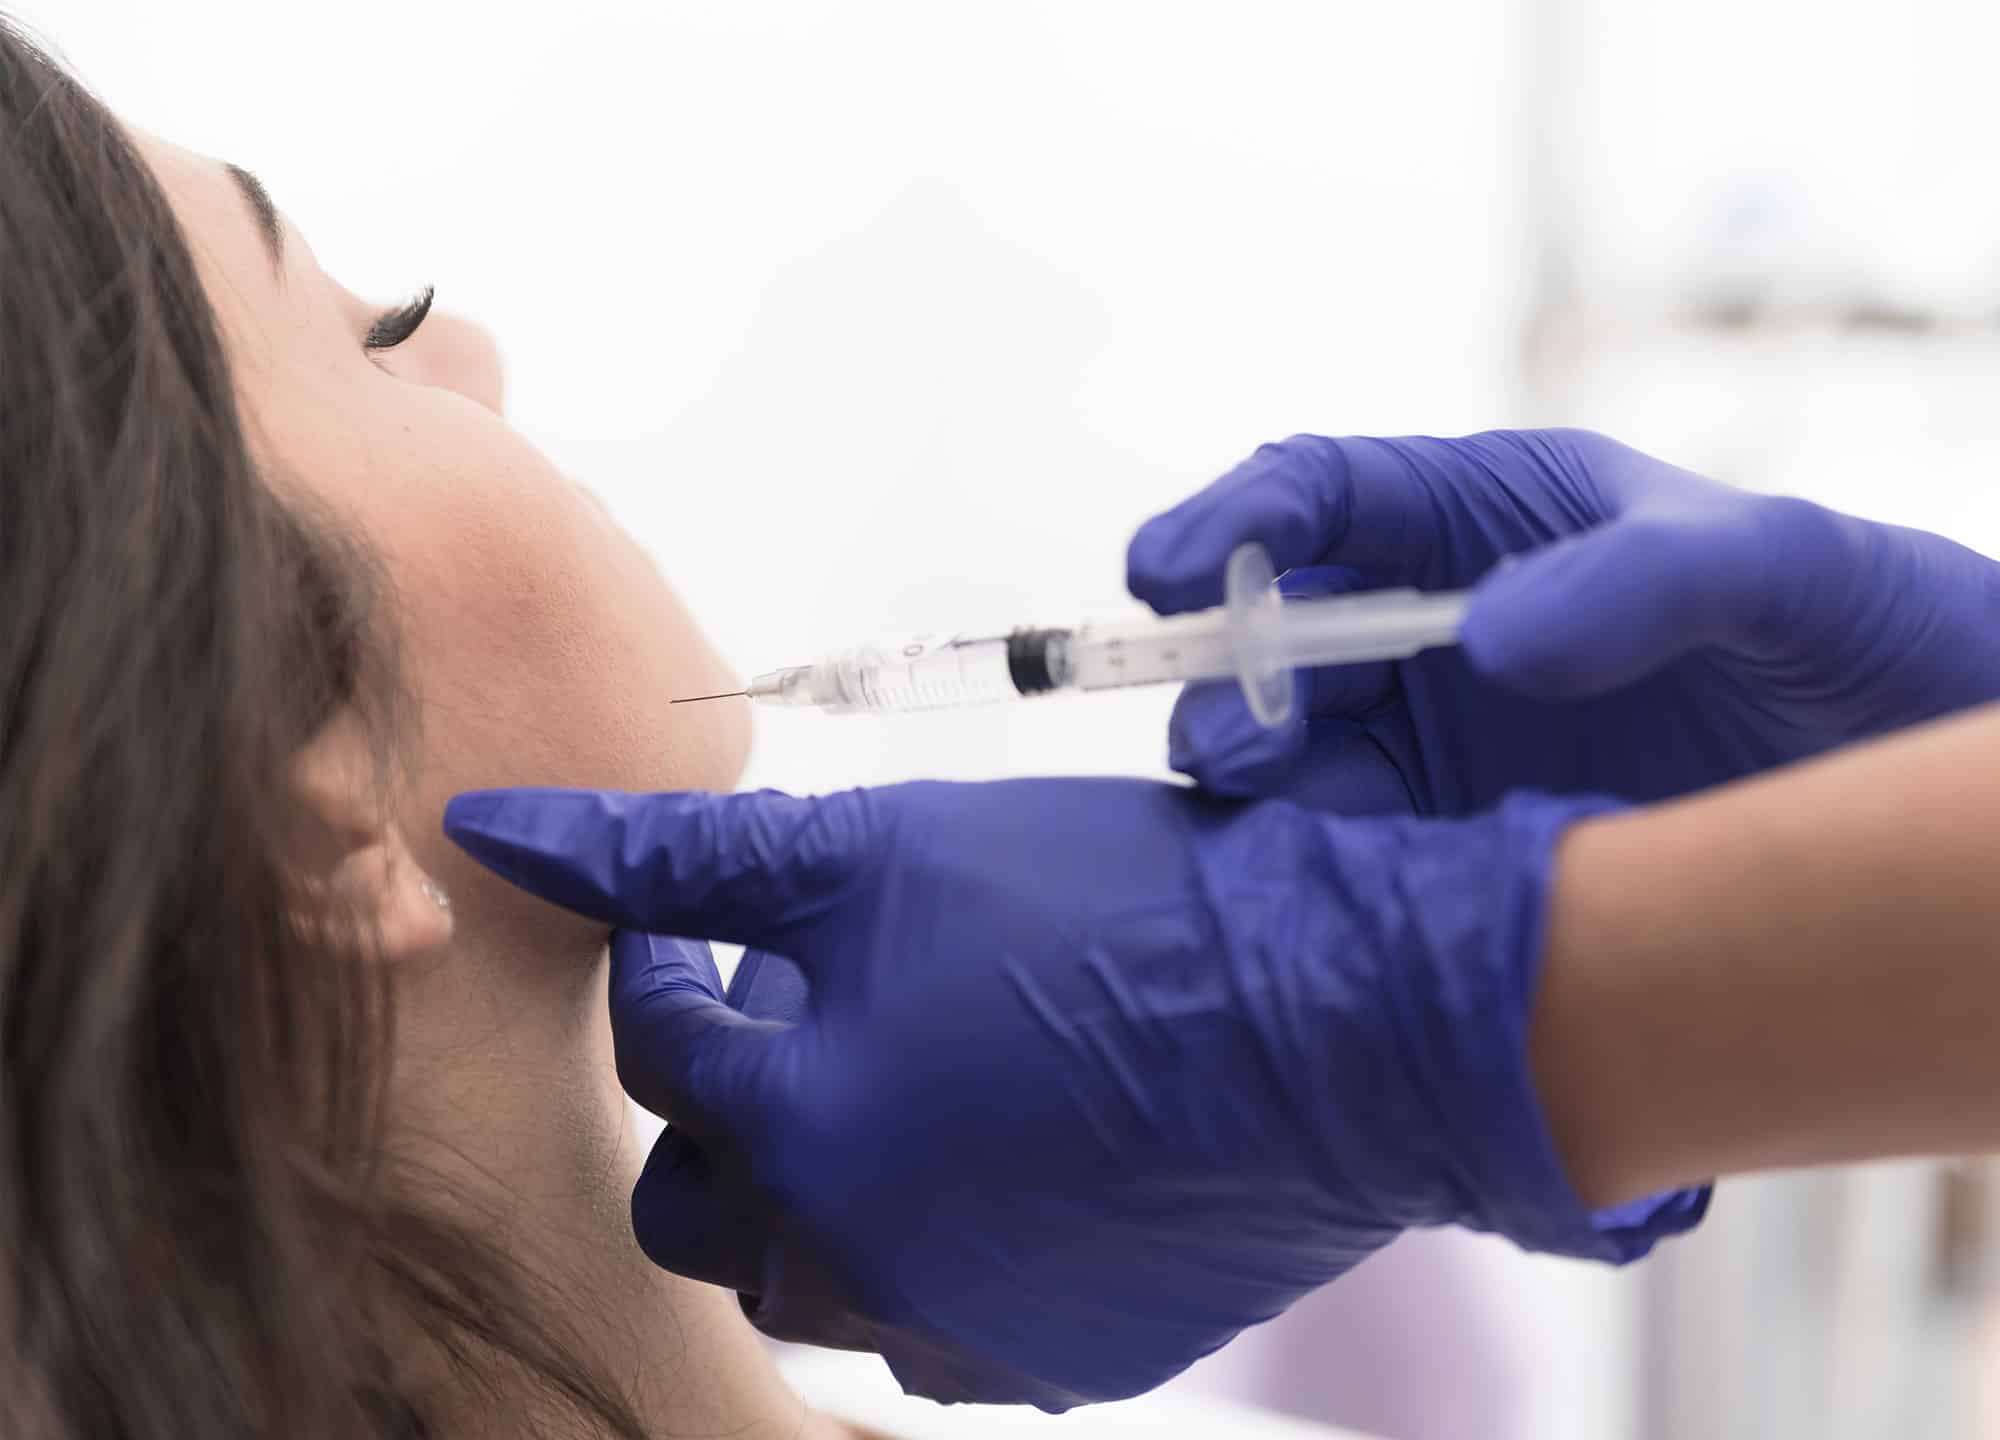 Doctors weigh in on how masseter Botox works, who’s a good candidate, and the strange side effects you may have heard about on social media.